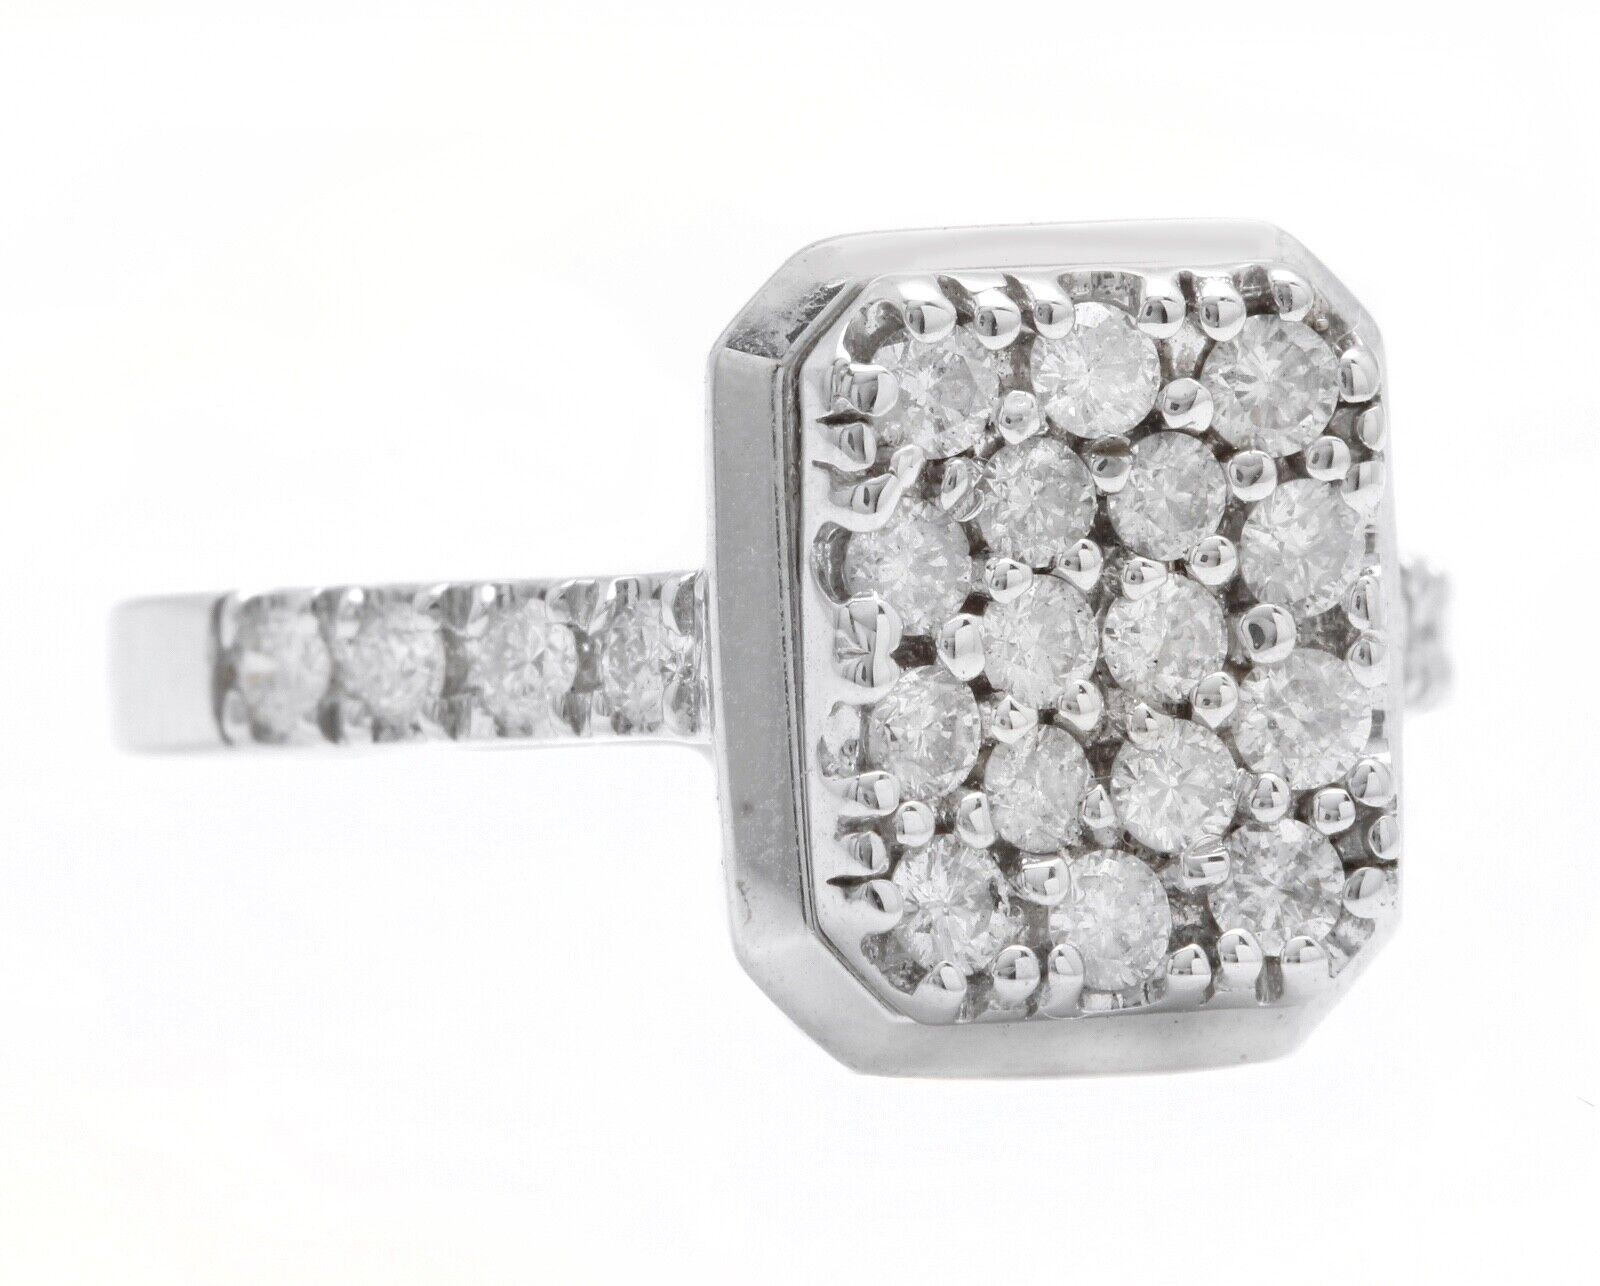 0.50 Carats Natural Diamond 14K Solid White Gold Ring

Suggested Replacement Value: $4,500.00

Stamped: (14K)

Total Natural Round Cut Diamonds Weight: Approx. 0.50 Carats (color G-H / Clarity SI)

Top of the ring measures: Approx. 12.20 x